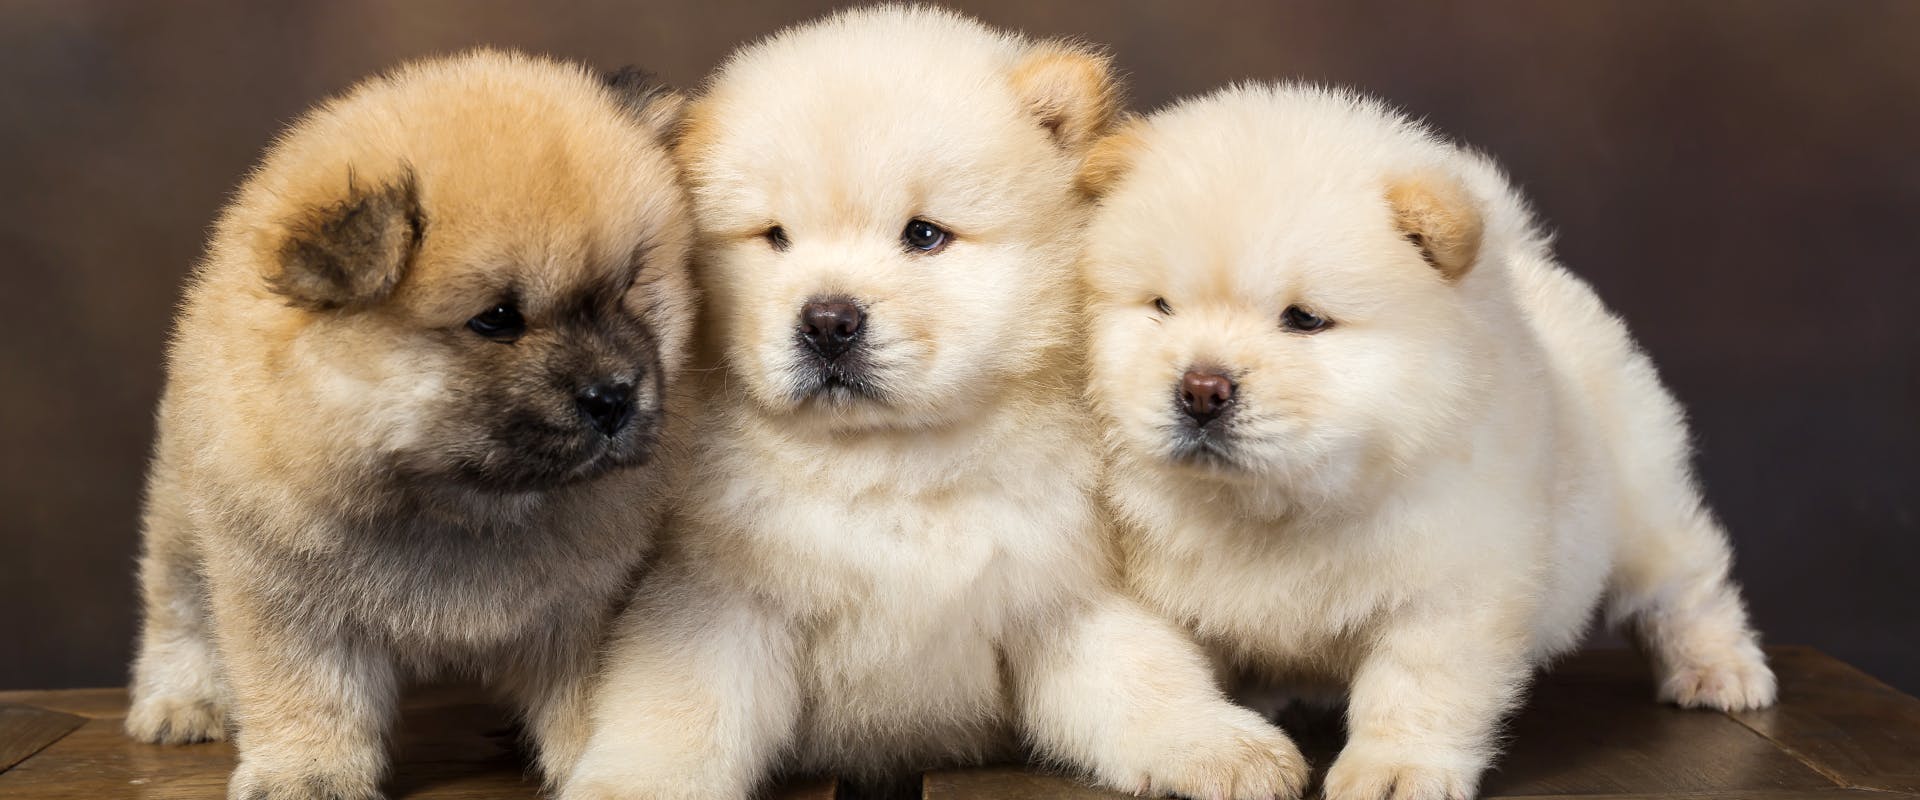 three chow chow puppies lying next to each other on a wooden surface